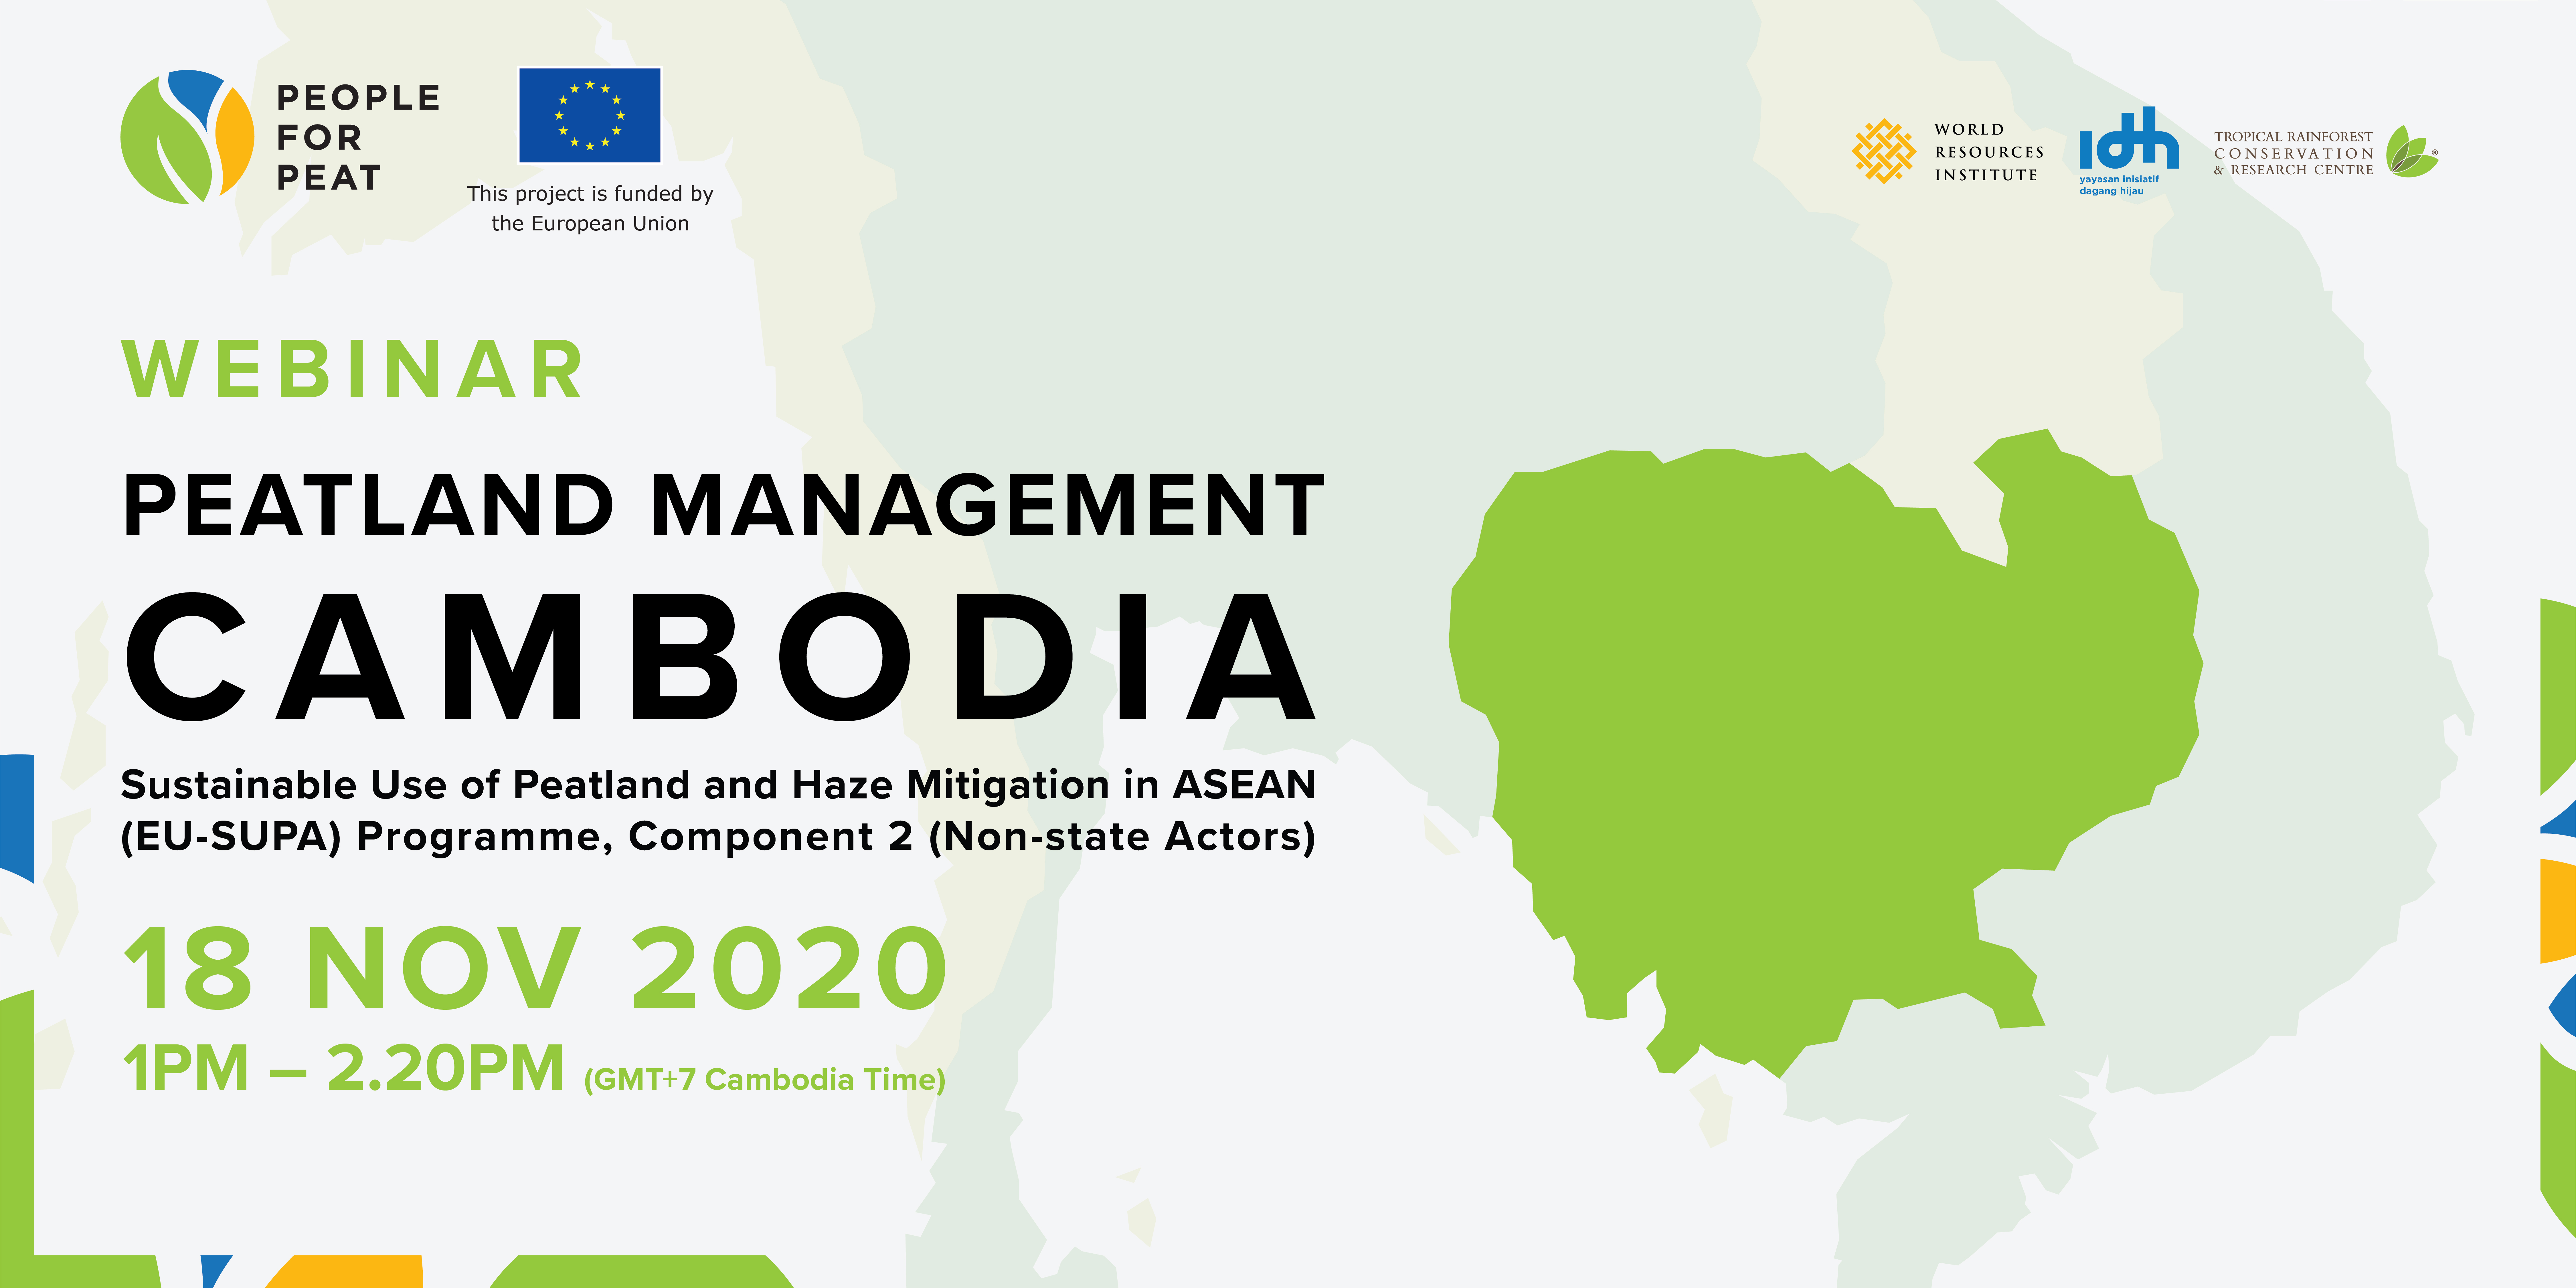 Conference of Parties and Webinar on Peatland Management Cambodia 18 November 2020